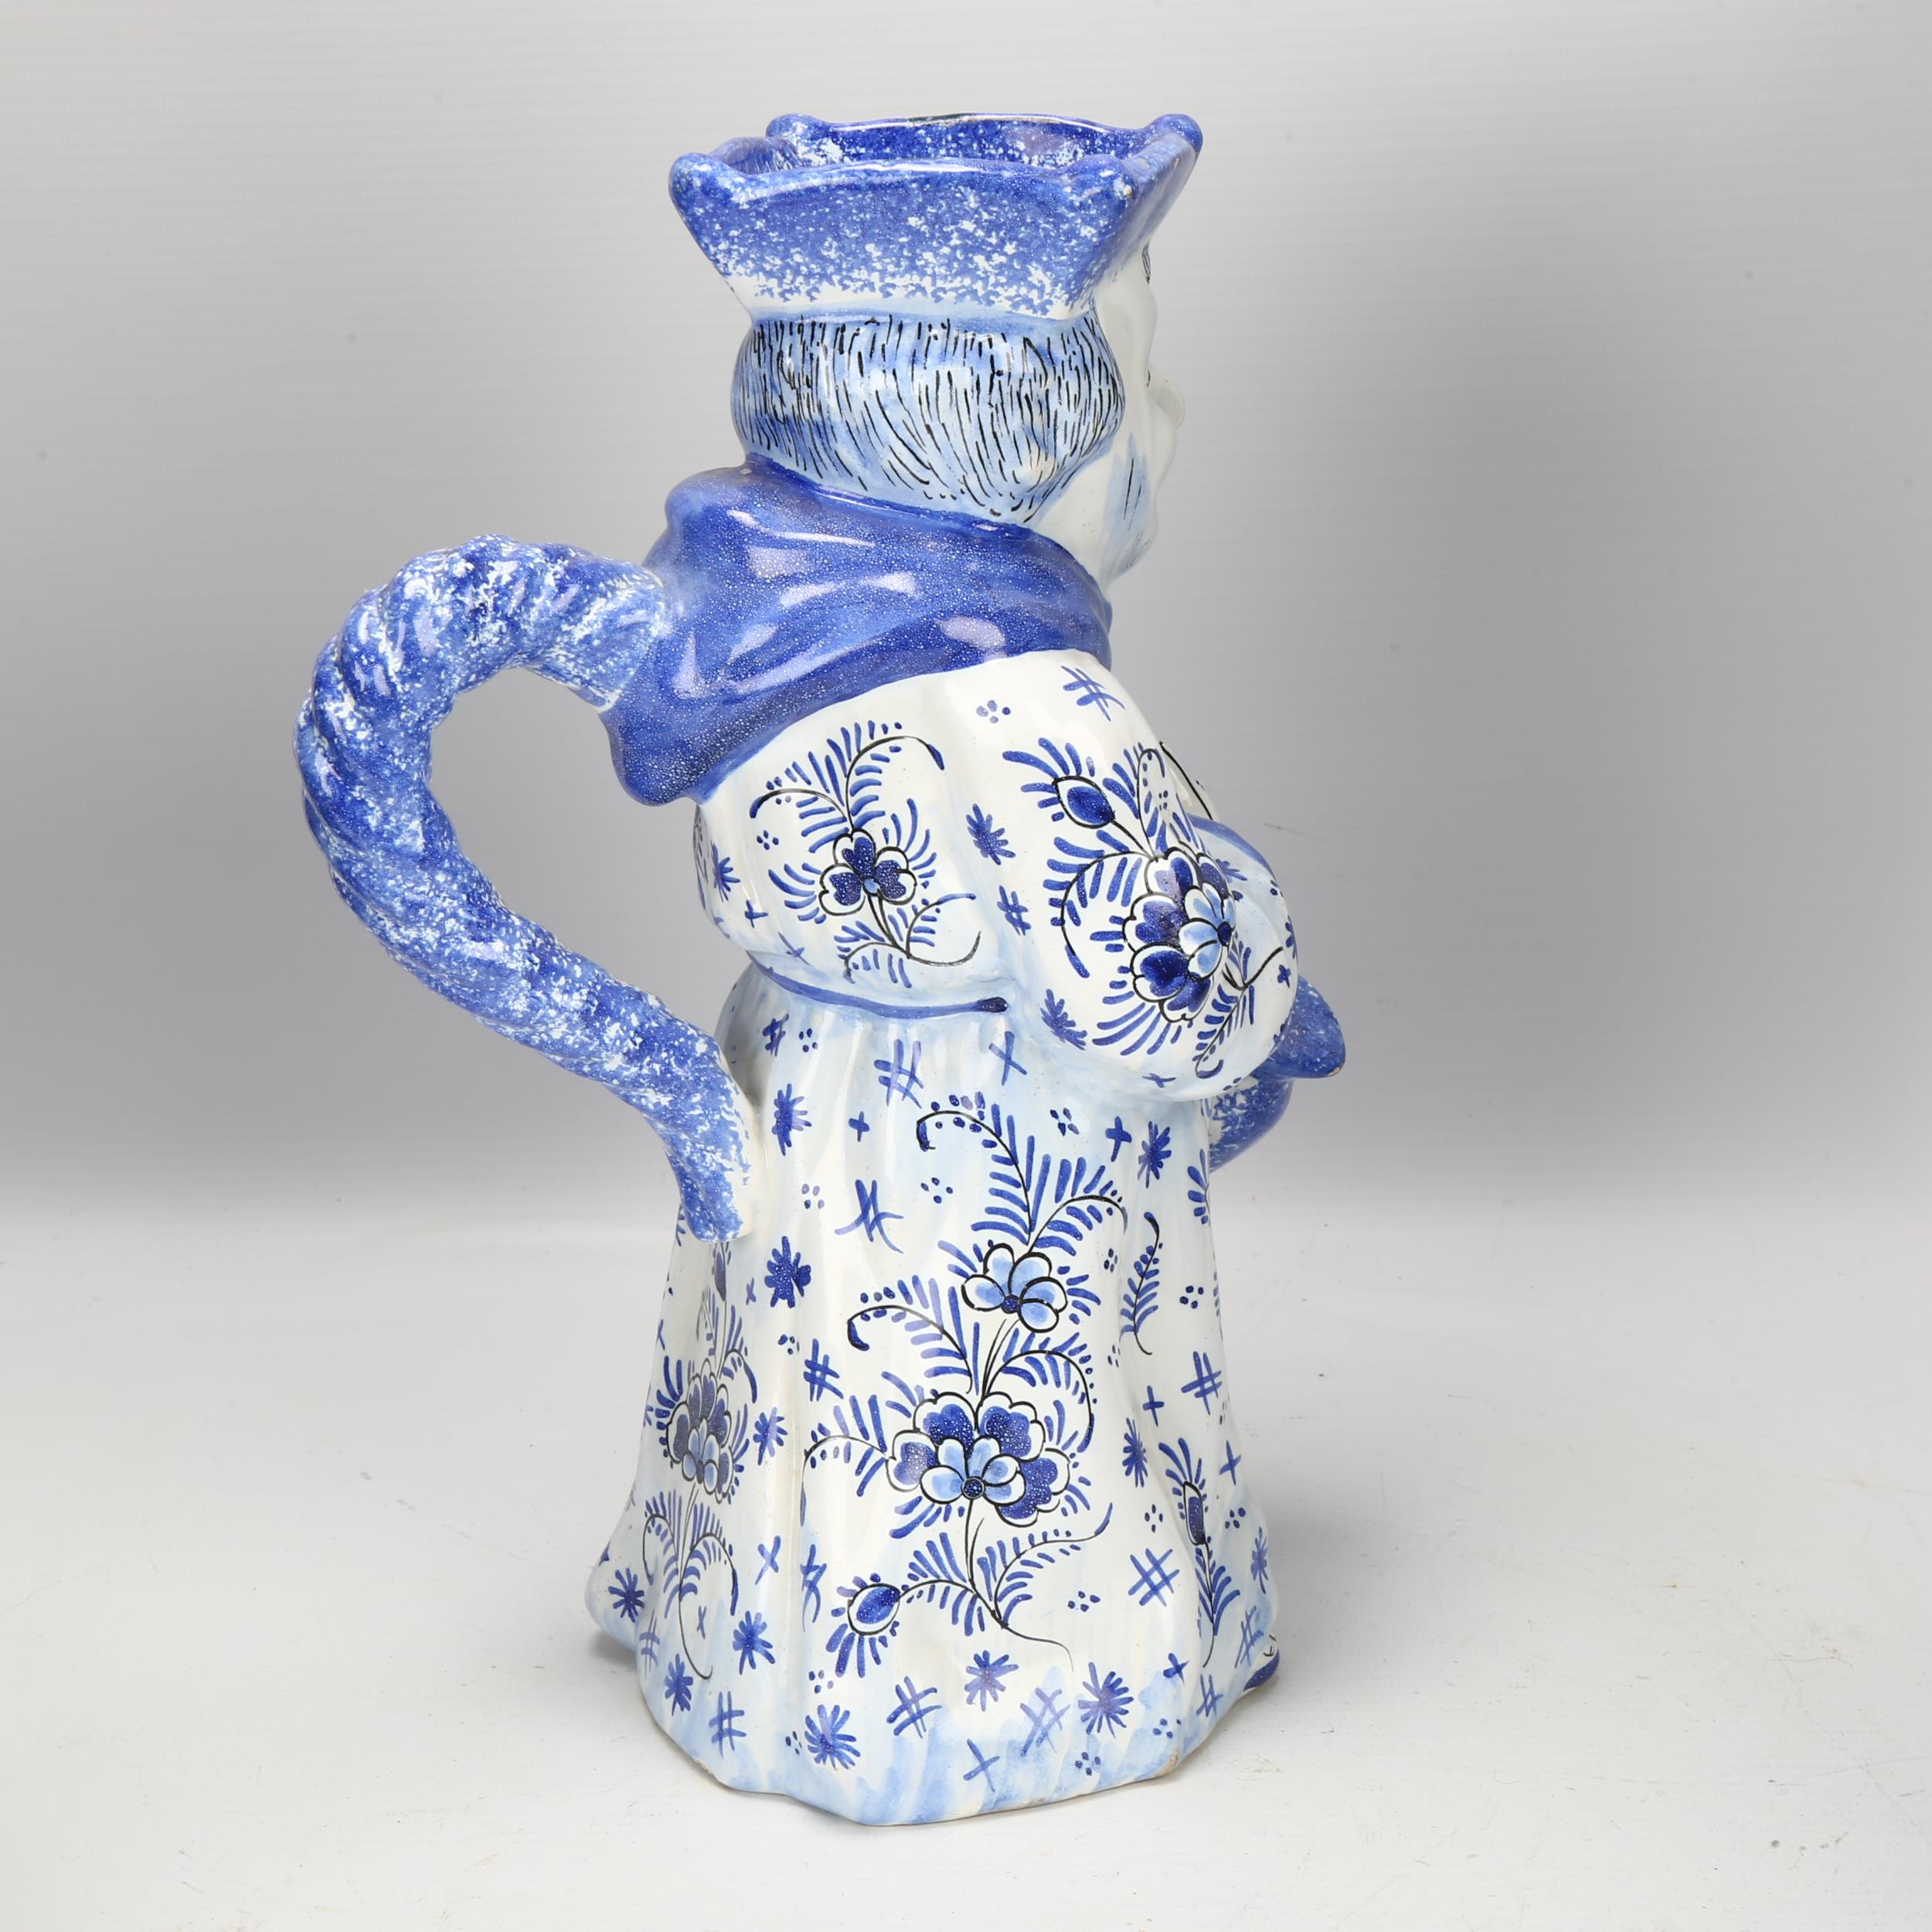 Delft blue and white pottery Toby jug, height 28.5cm 1 tiny glaze chip on the side of the hat, - Image 2 of 3